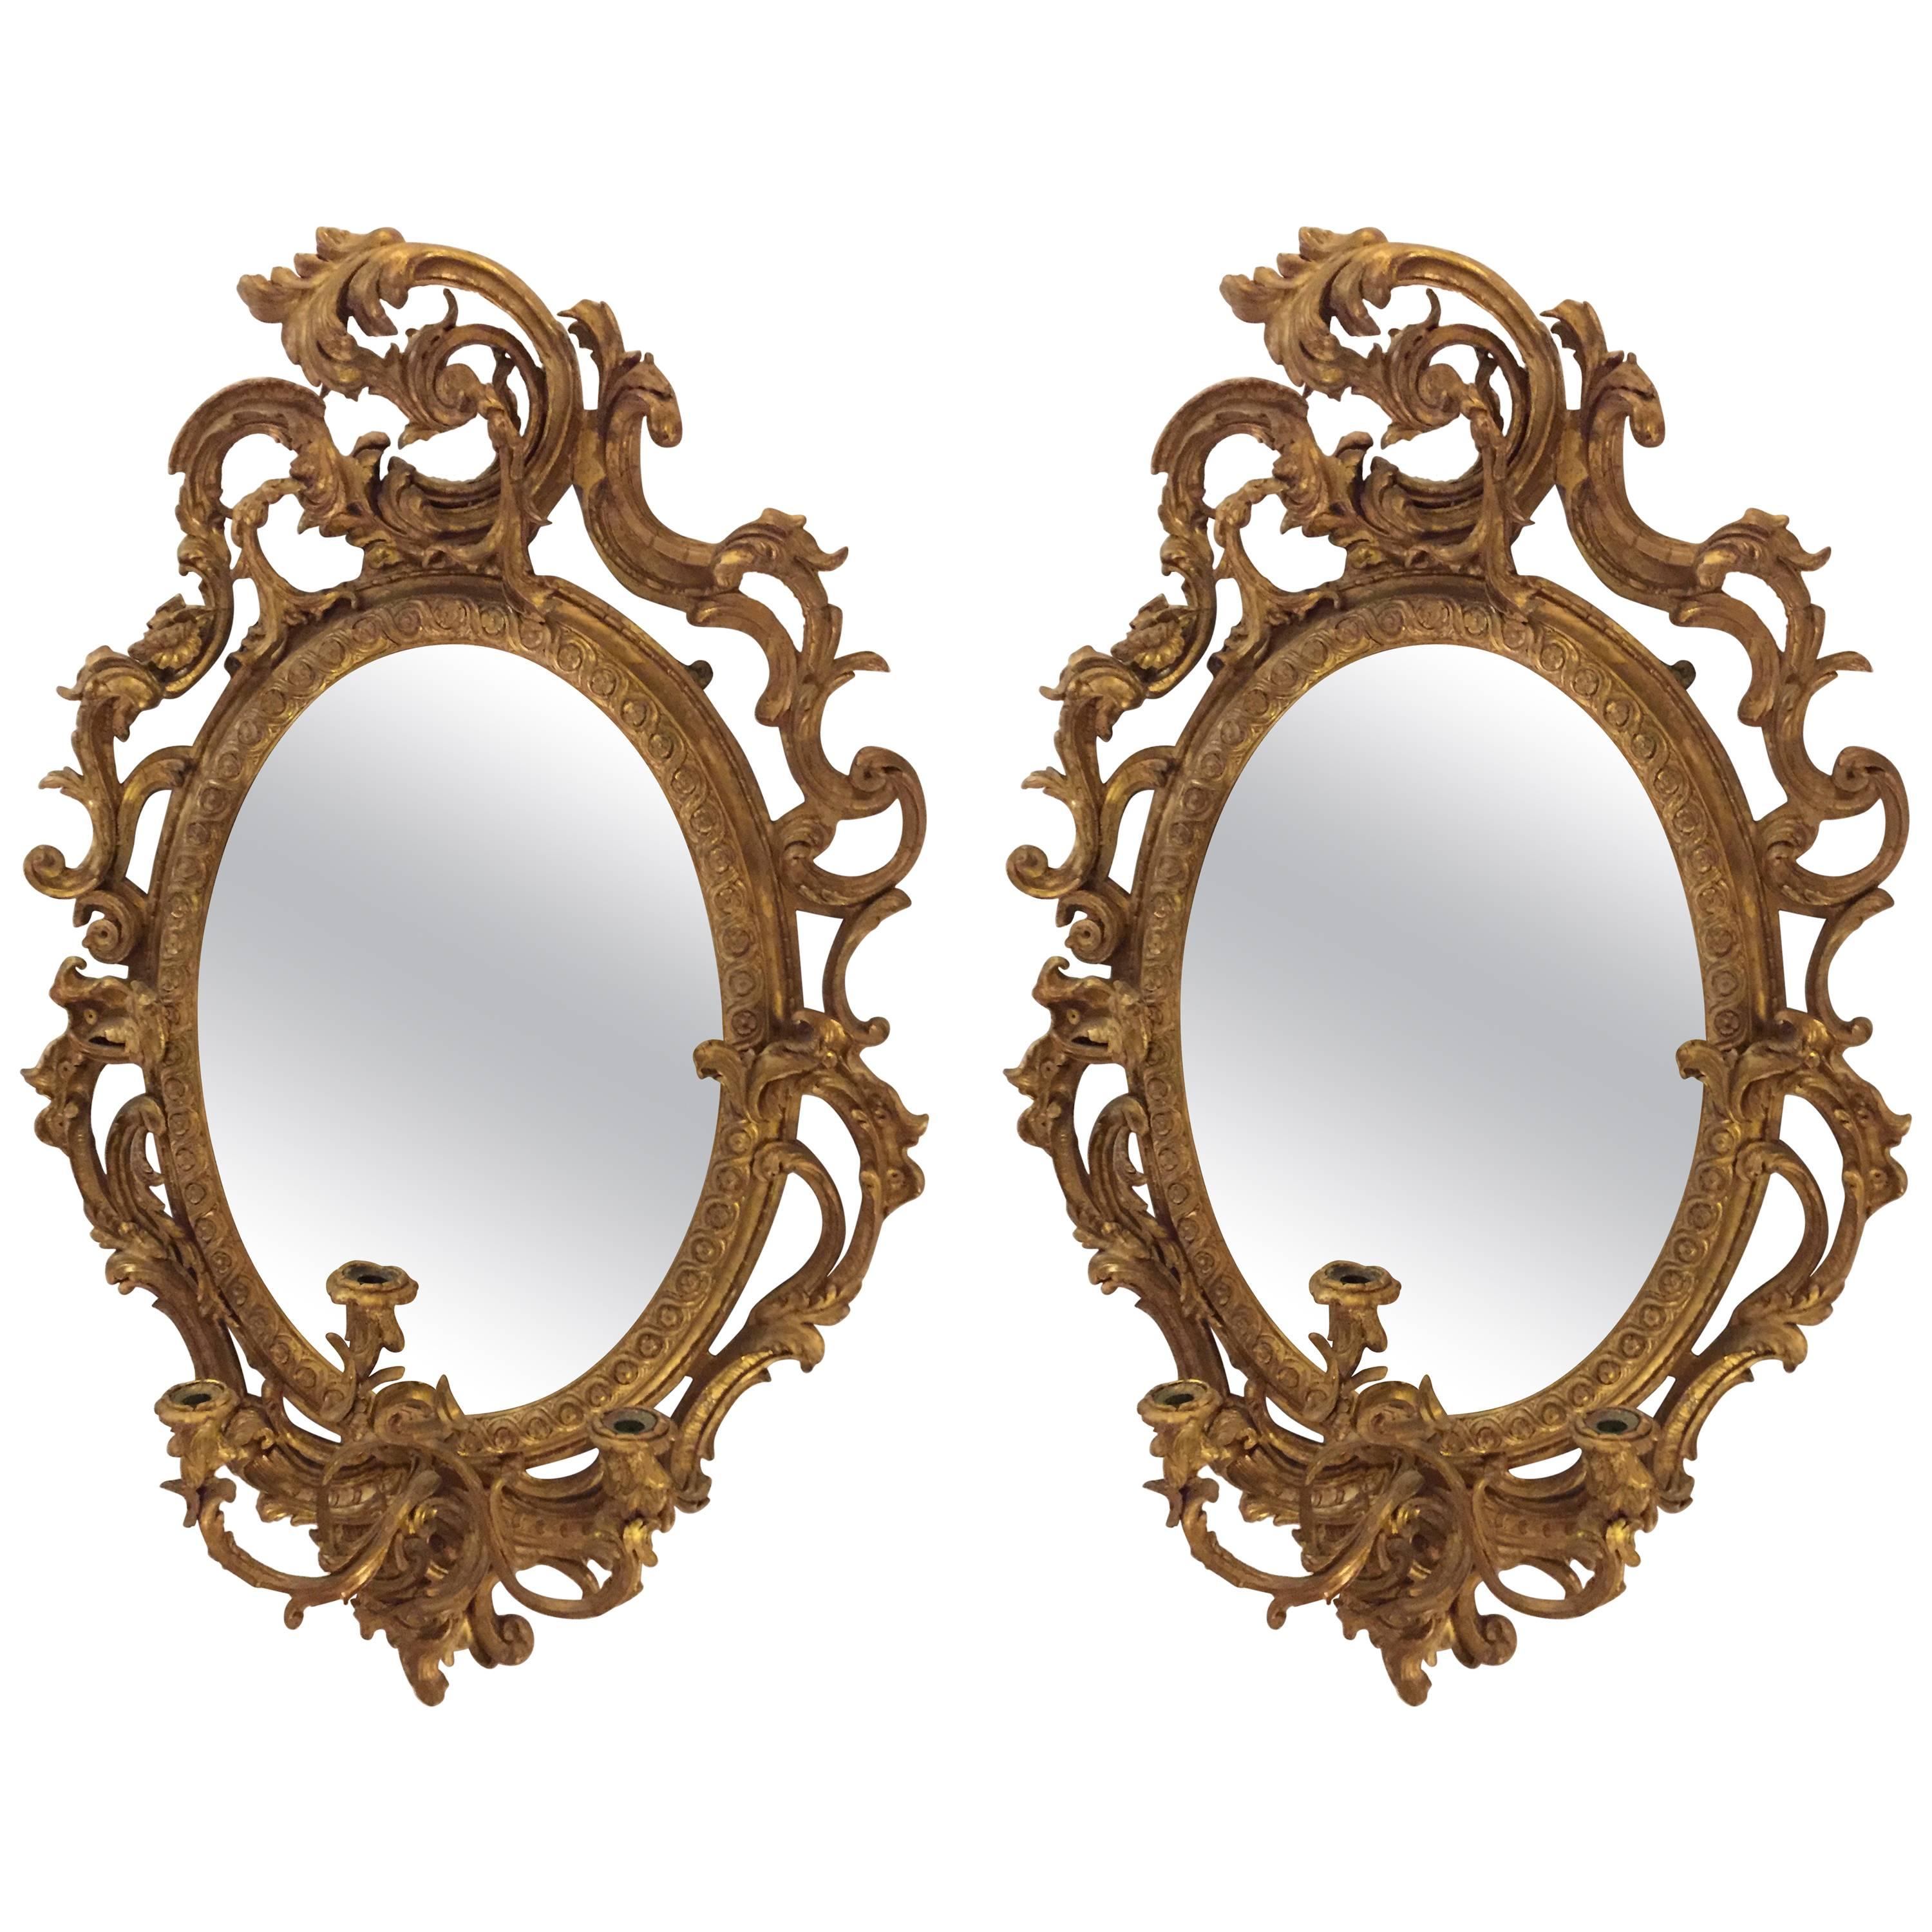 19th Century Pair of French Gilt and Gesso Wall Mirror Sconce